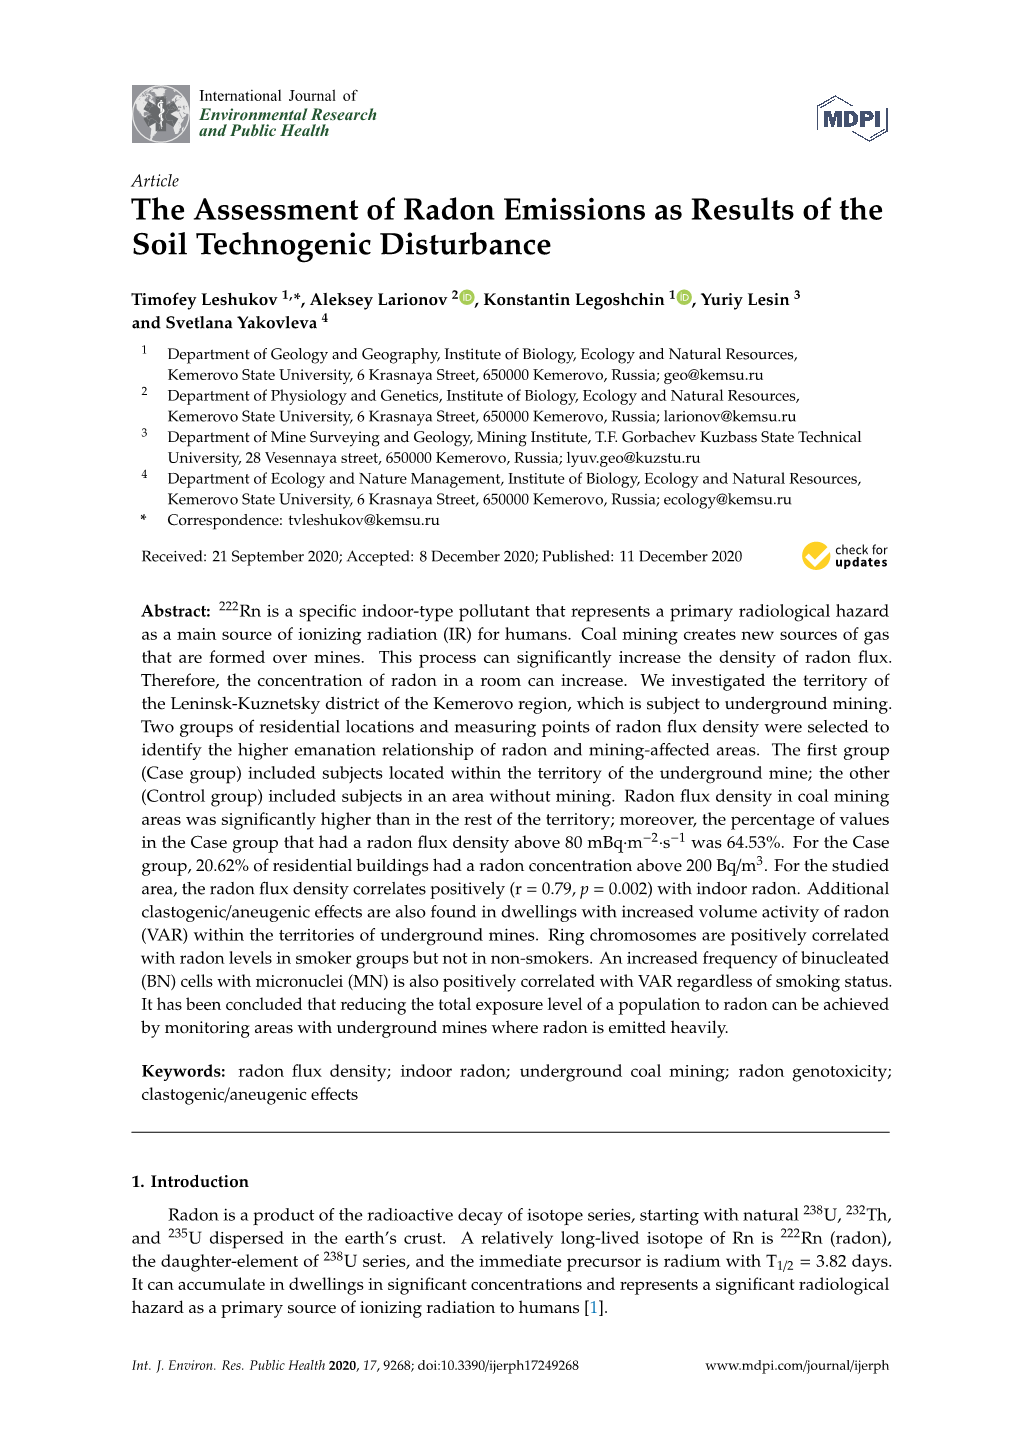 The Assessment of Radon Emissions As Results of the Soil Technogenic Disturbance